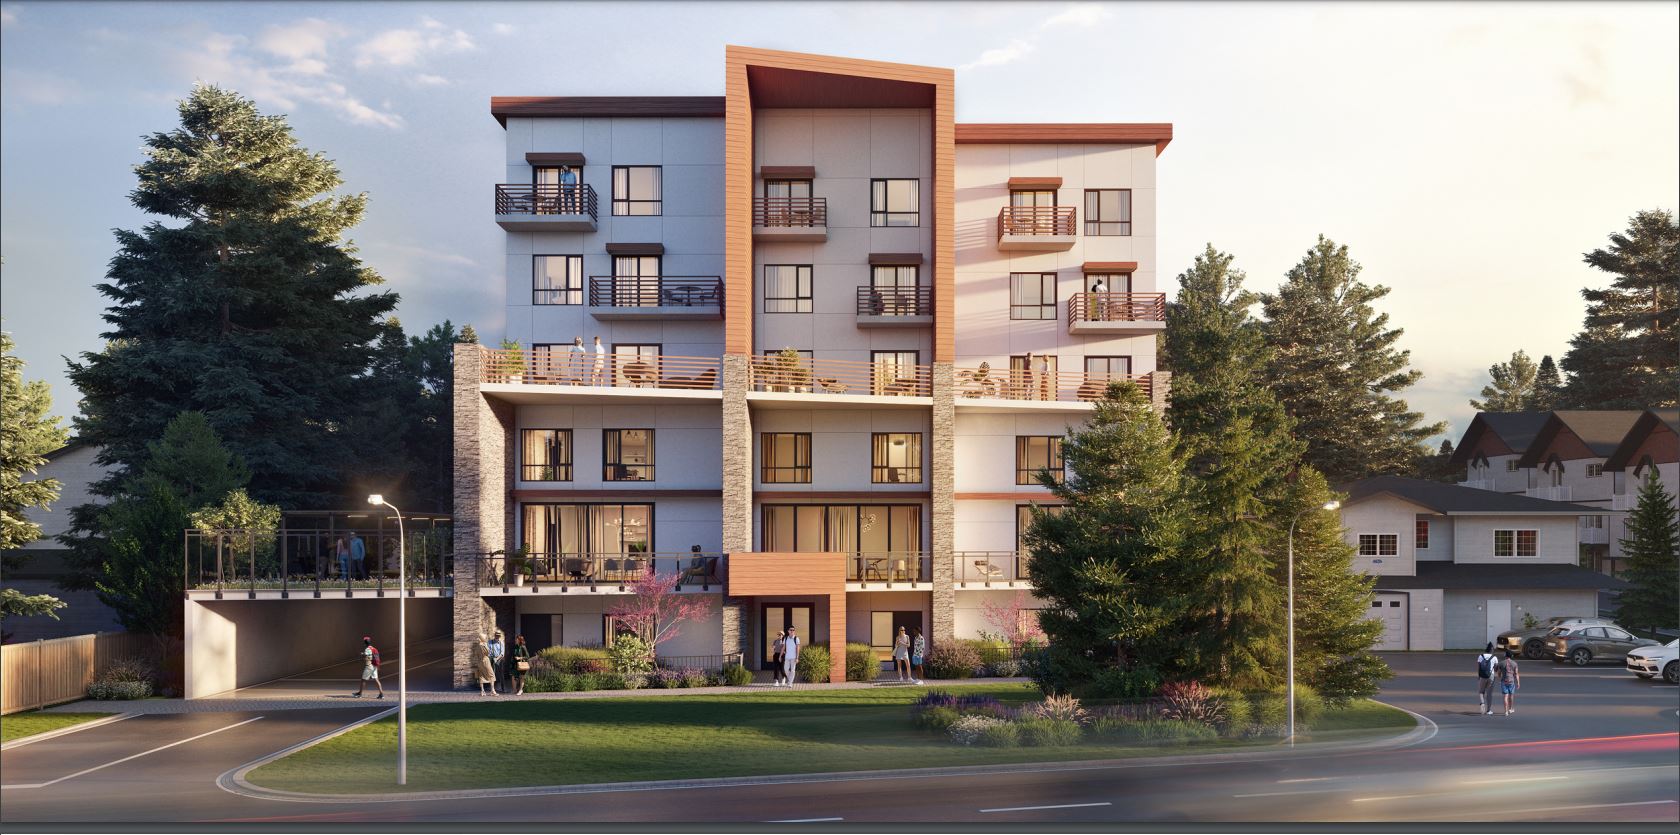 A collection of 1-, 2- & 3-bedroom strata homes in Langford.